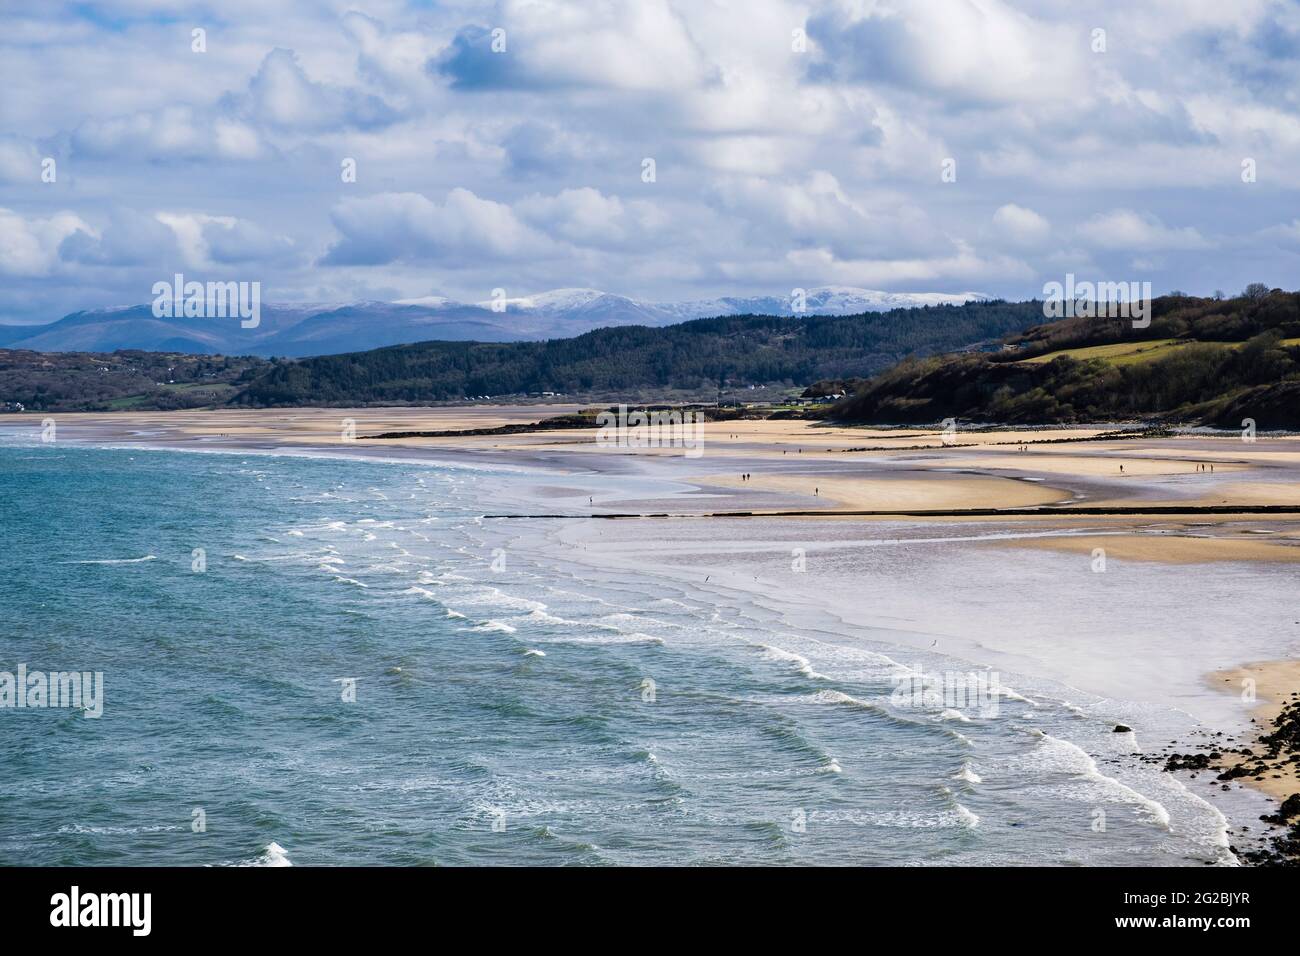 View across quiet sandy beach at low tide to distant snow capped mountains of Snowdonia. Benllech, Isle of Anglesey, Wales, UK, Britain Stock Photo